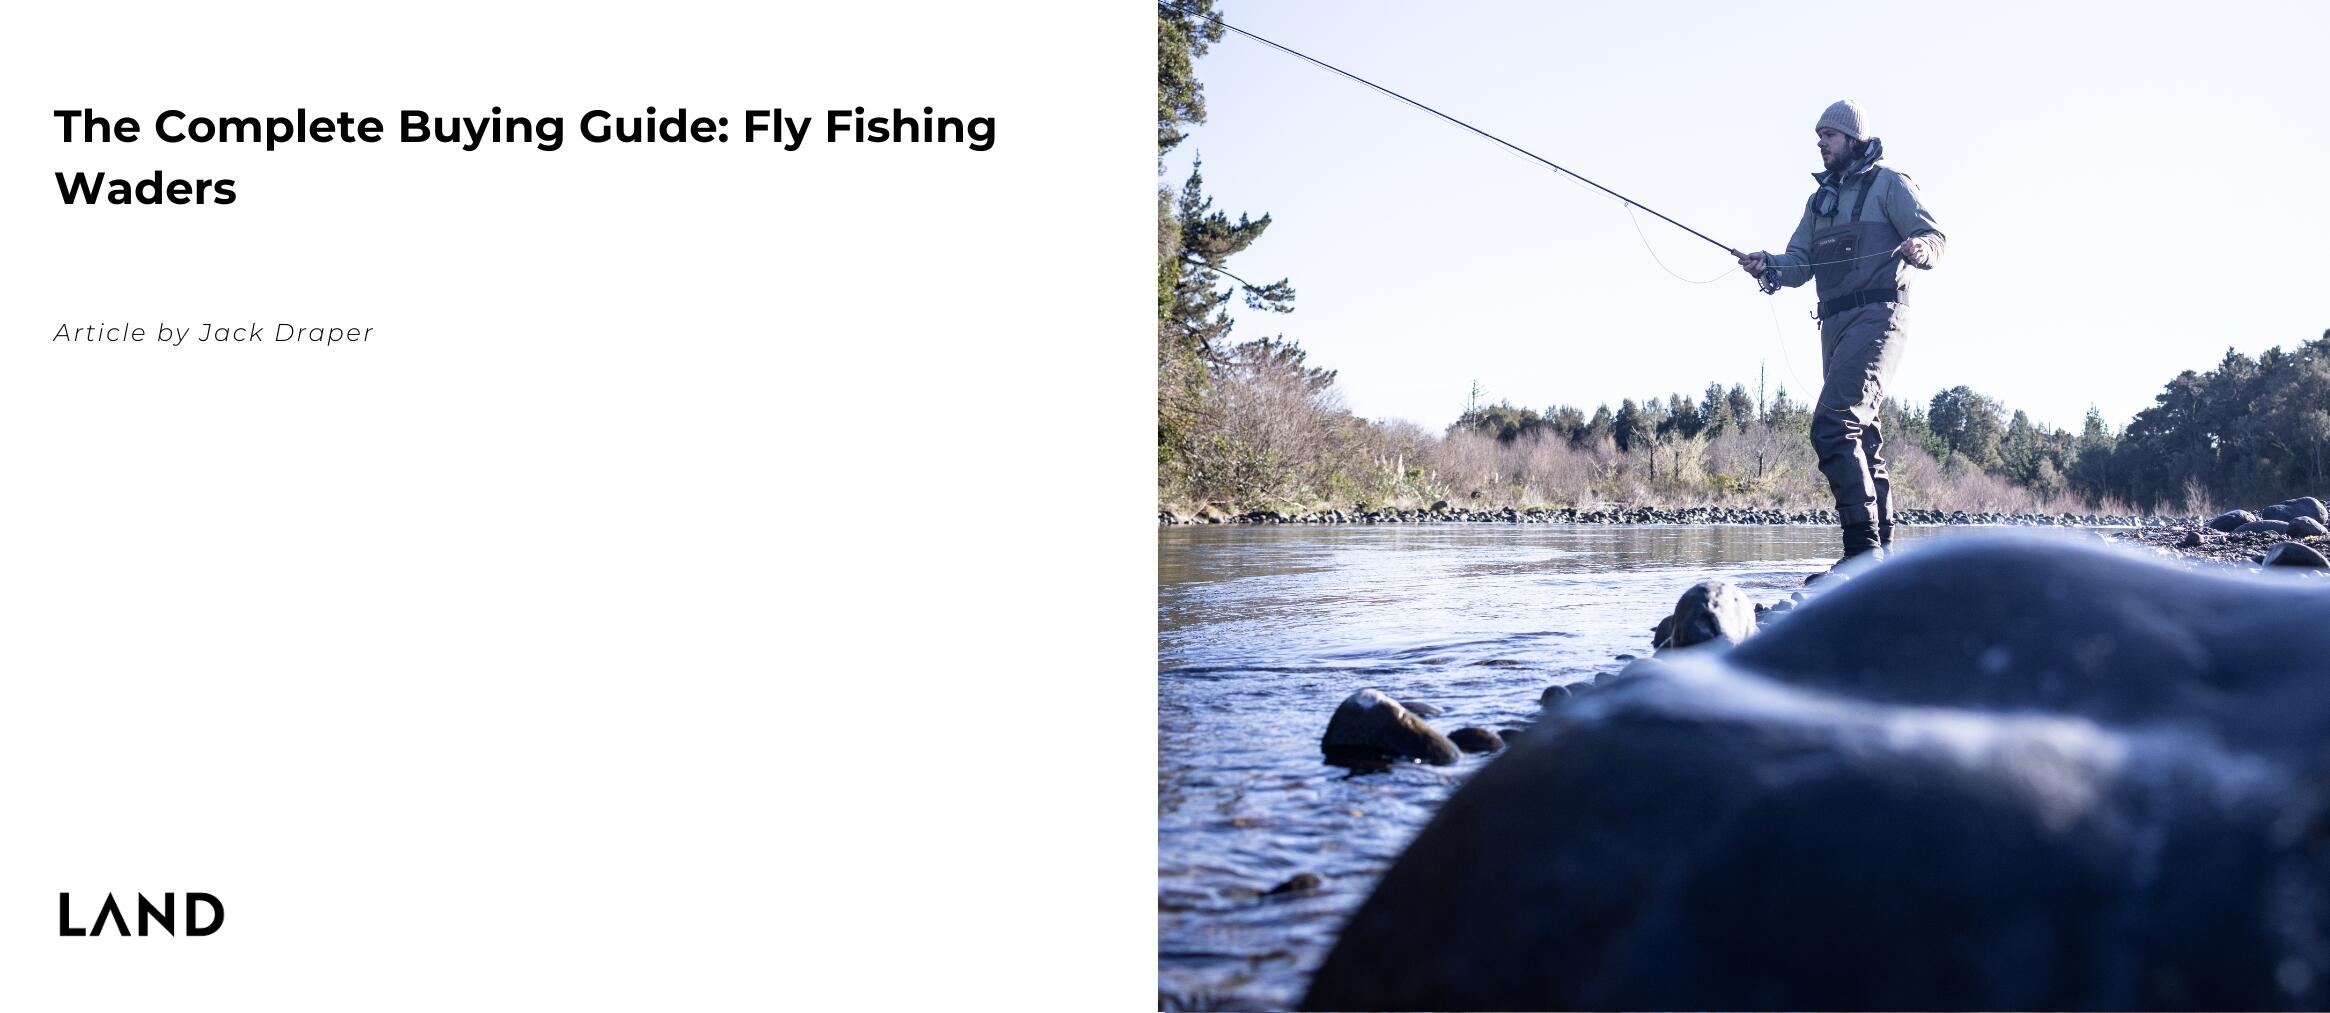 The Complete Buying Guide: Fly Fishing Waders